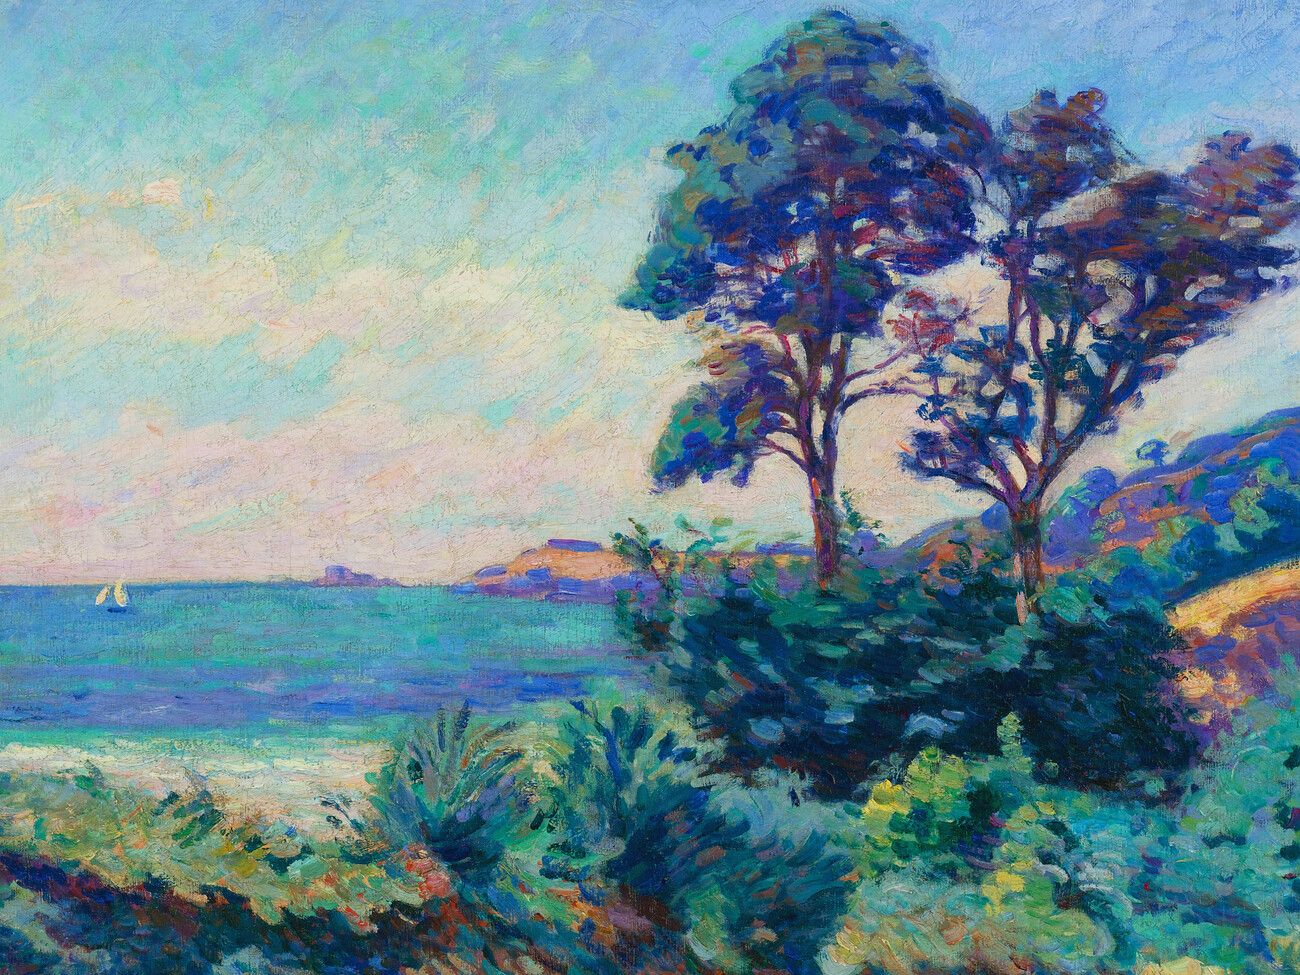 Wall Art Print | Marine À Saint Palais (tropical Landscape With A Boat On  The Water) – Armand Guillaumin | Europosters In Tropical Landscape Wall Art (View 7 of 15)